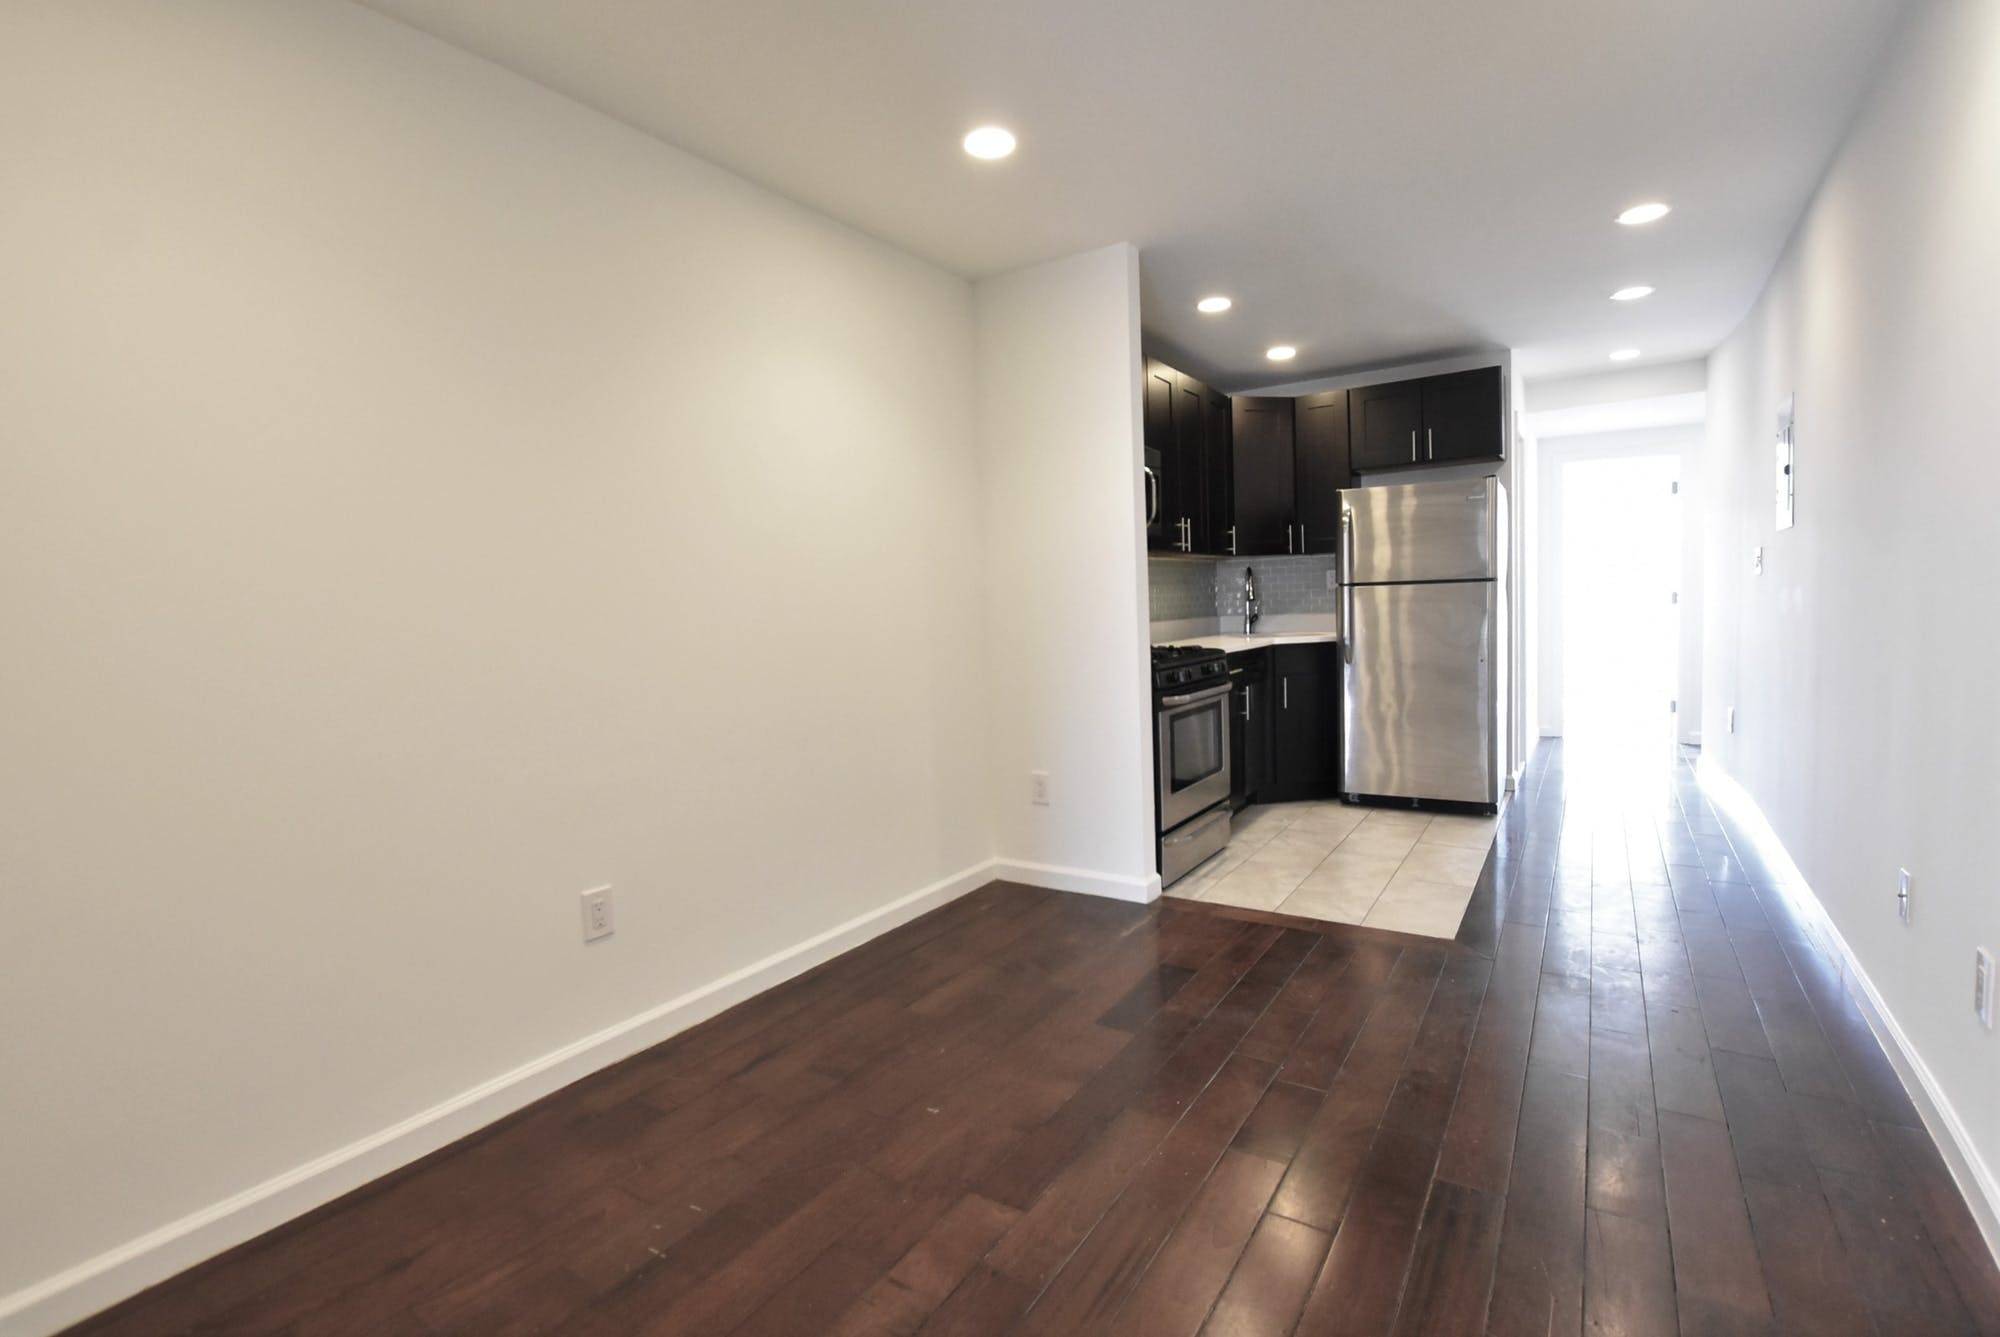 NEW TO MARKET ! ! ! MODERN SUNNY TWO BEDROOMS NEAR ATLANTIC TERMINAL !